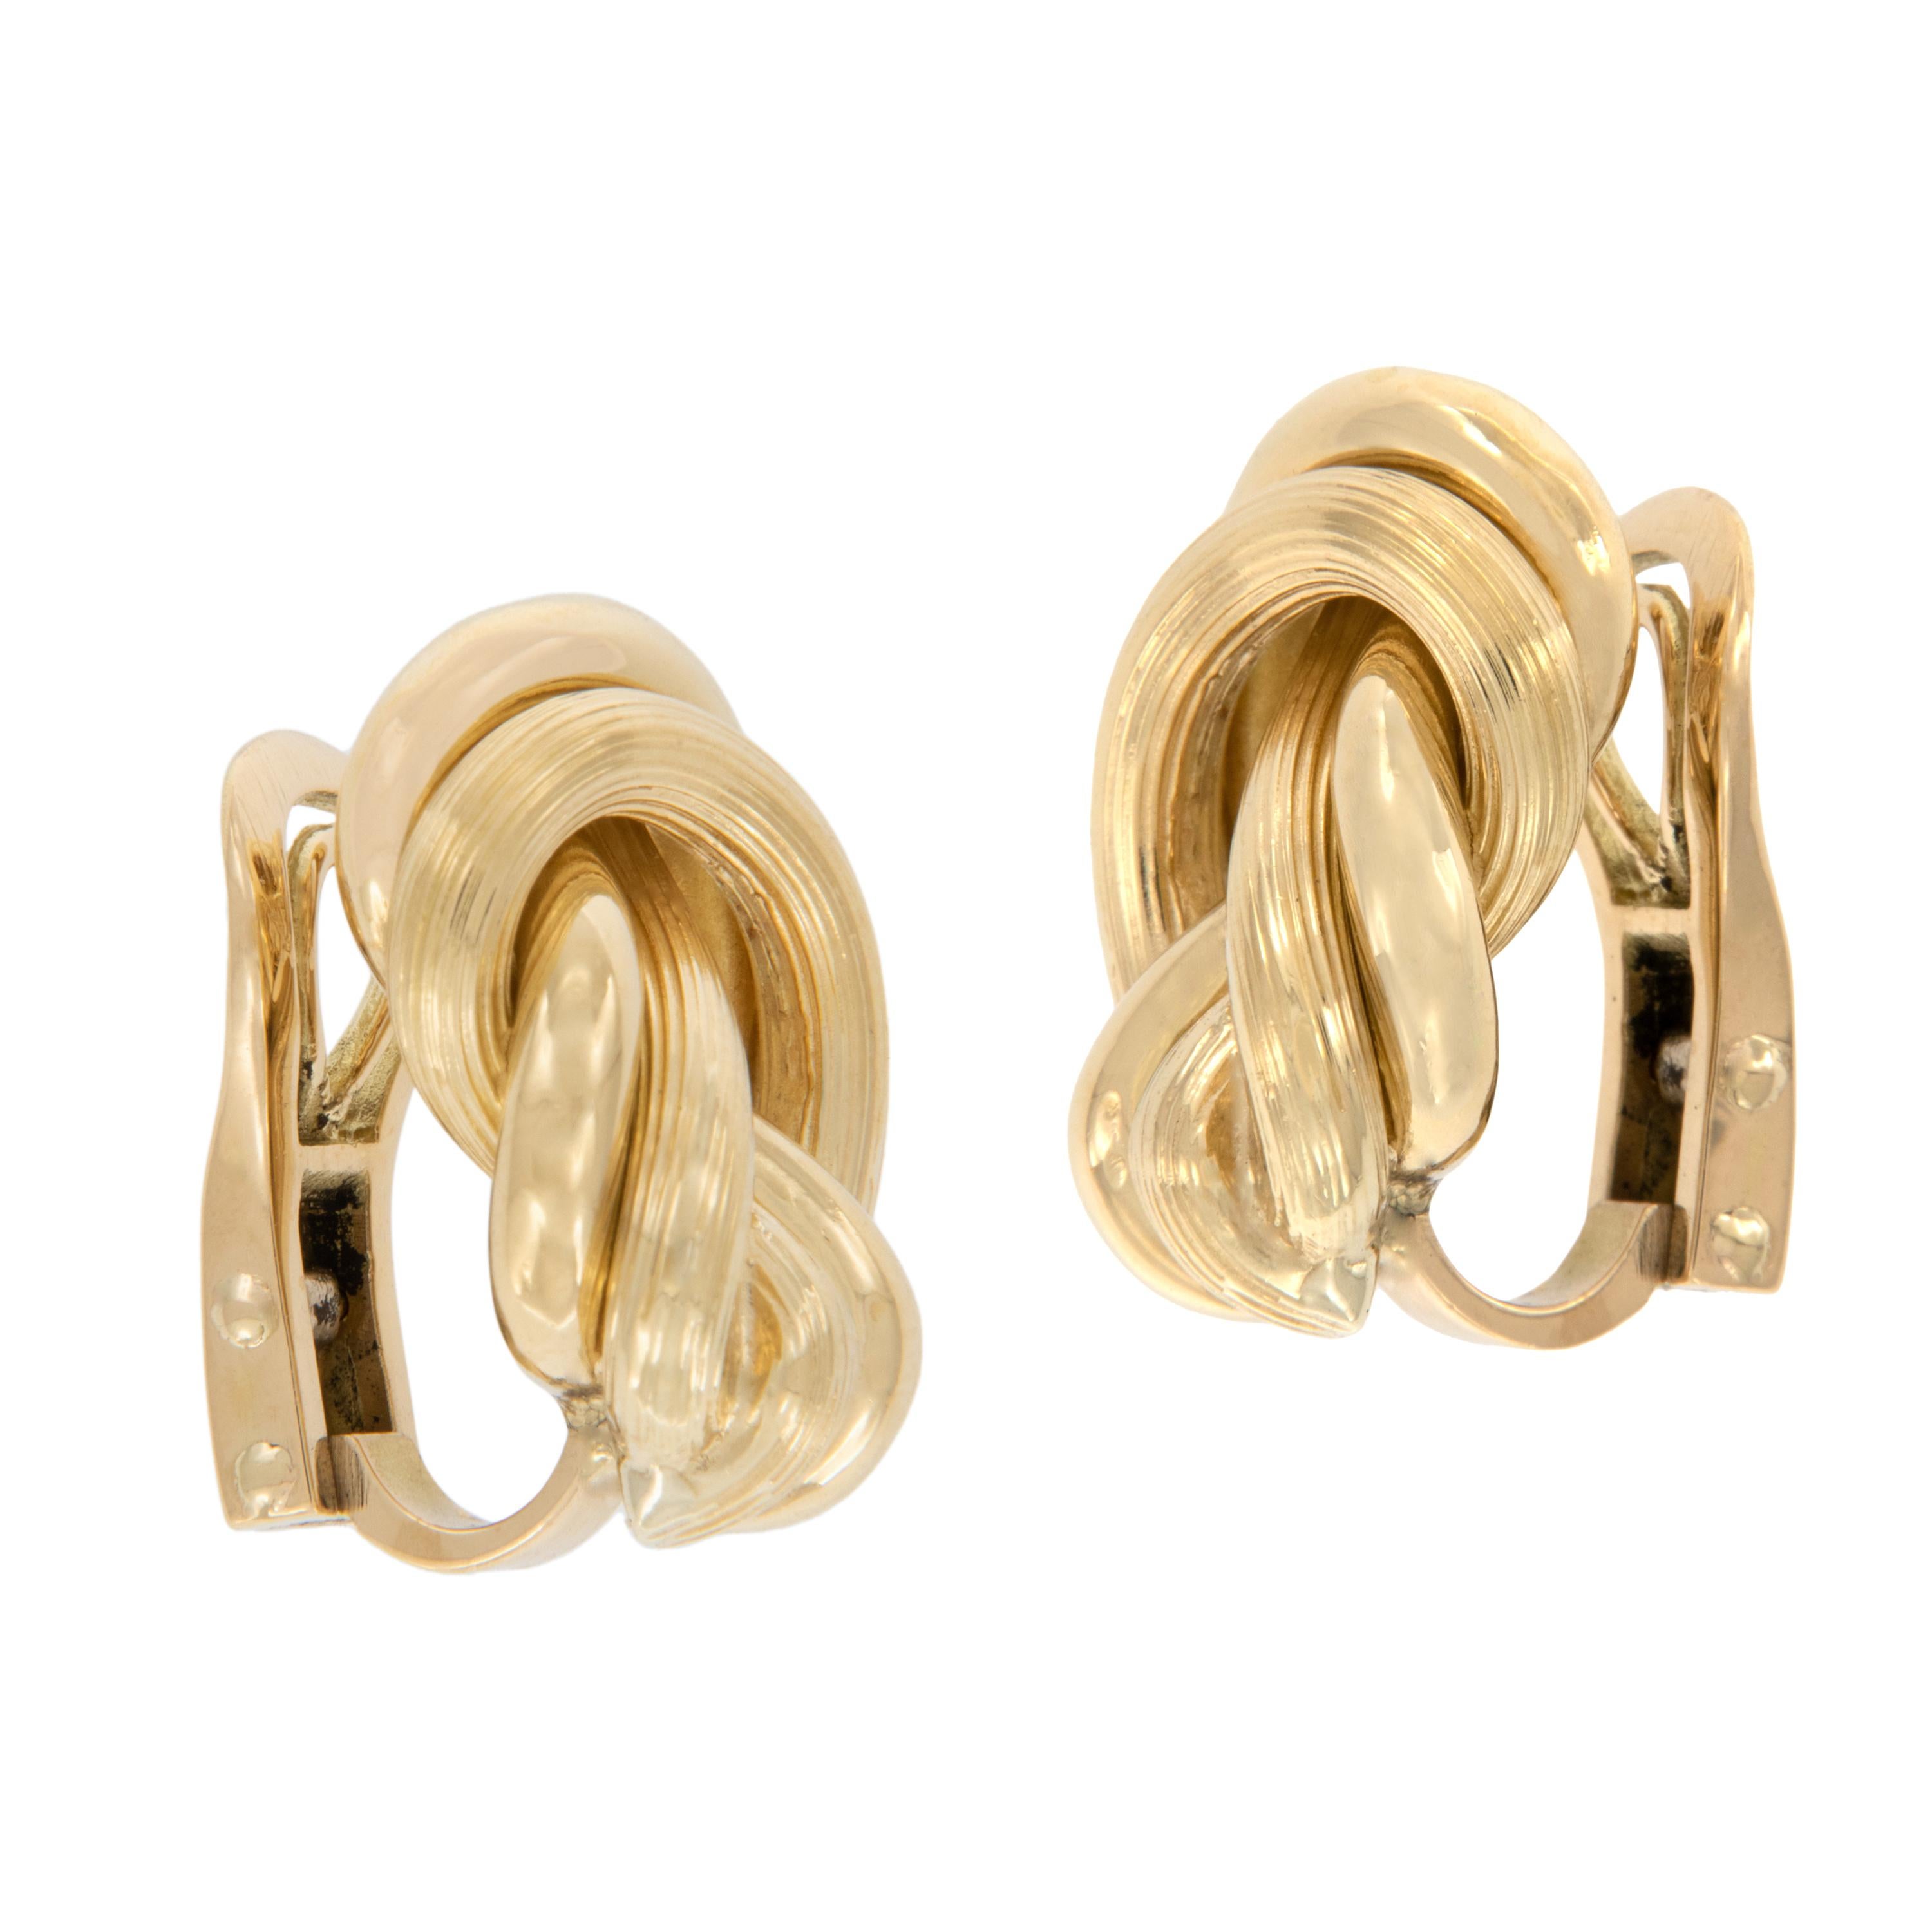 These elegant earrings have everything all tied up & ready to go! Made from rich 18 karat yellow gold these knot earrings have the edge with the subtle lined texture creating a soft, warm look. Heavy duty clip backs for security of wear.